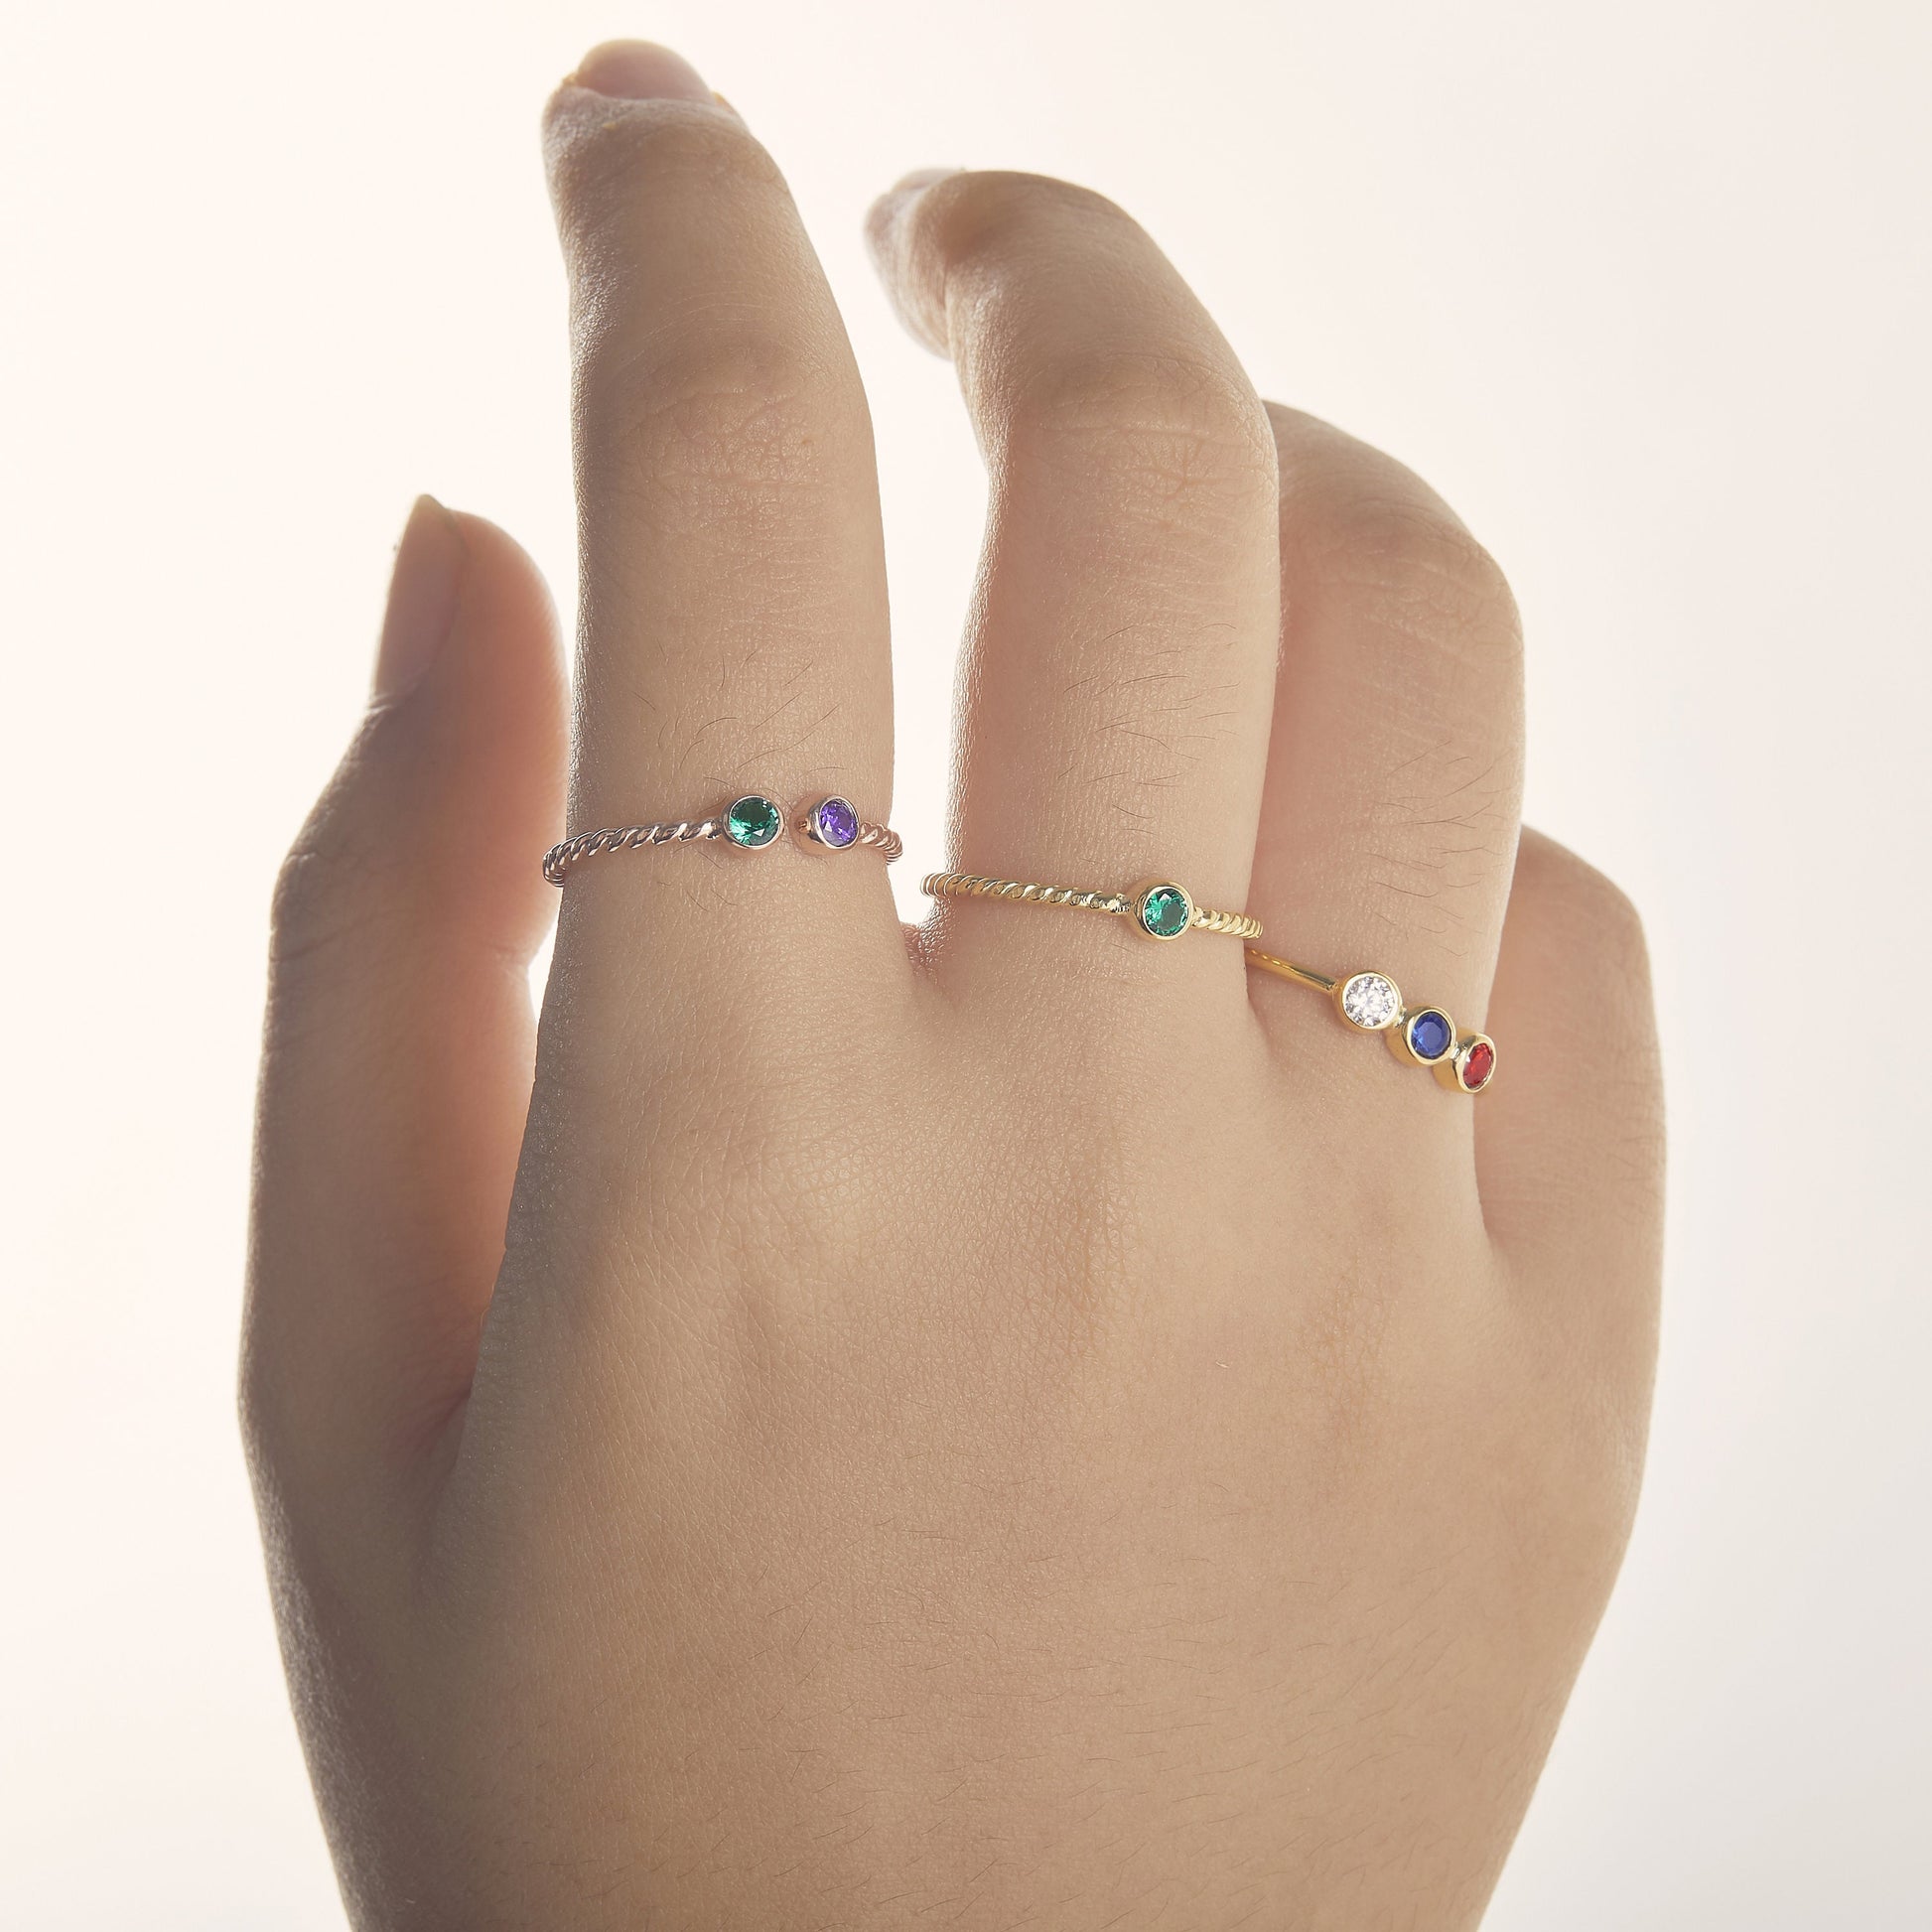 Birthstone Ring | Gemstone Ring | Birthstone Jewelry | Stacking Ring | Personalized  Stackable Ring | Family Ring | Dainty Promise Ring